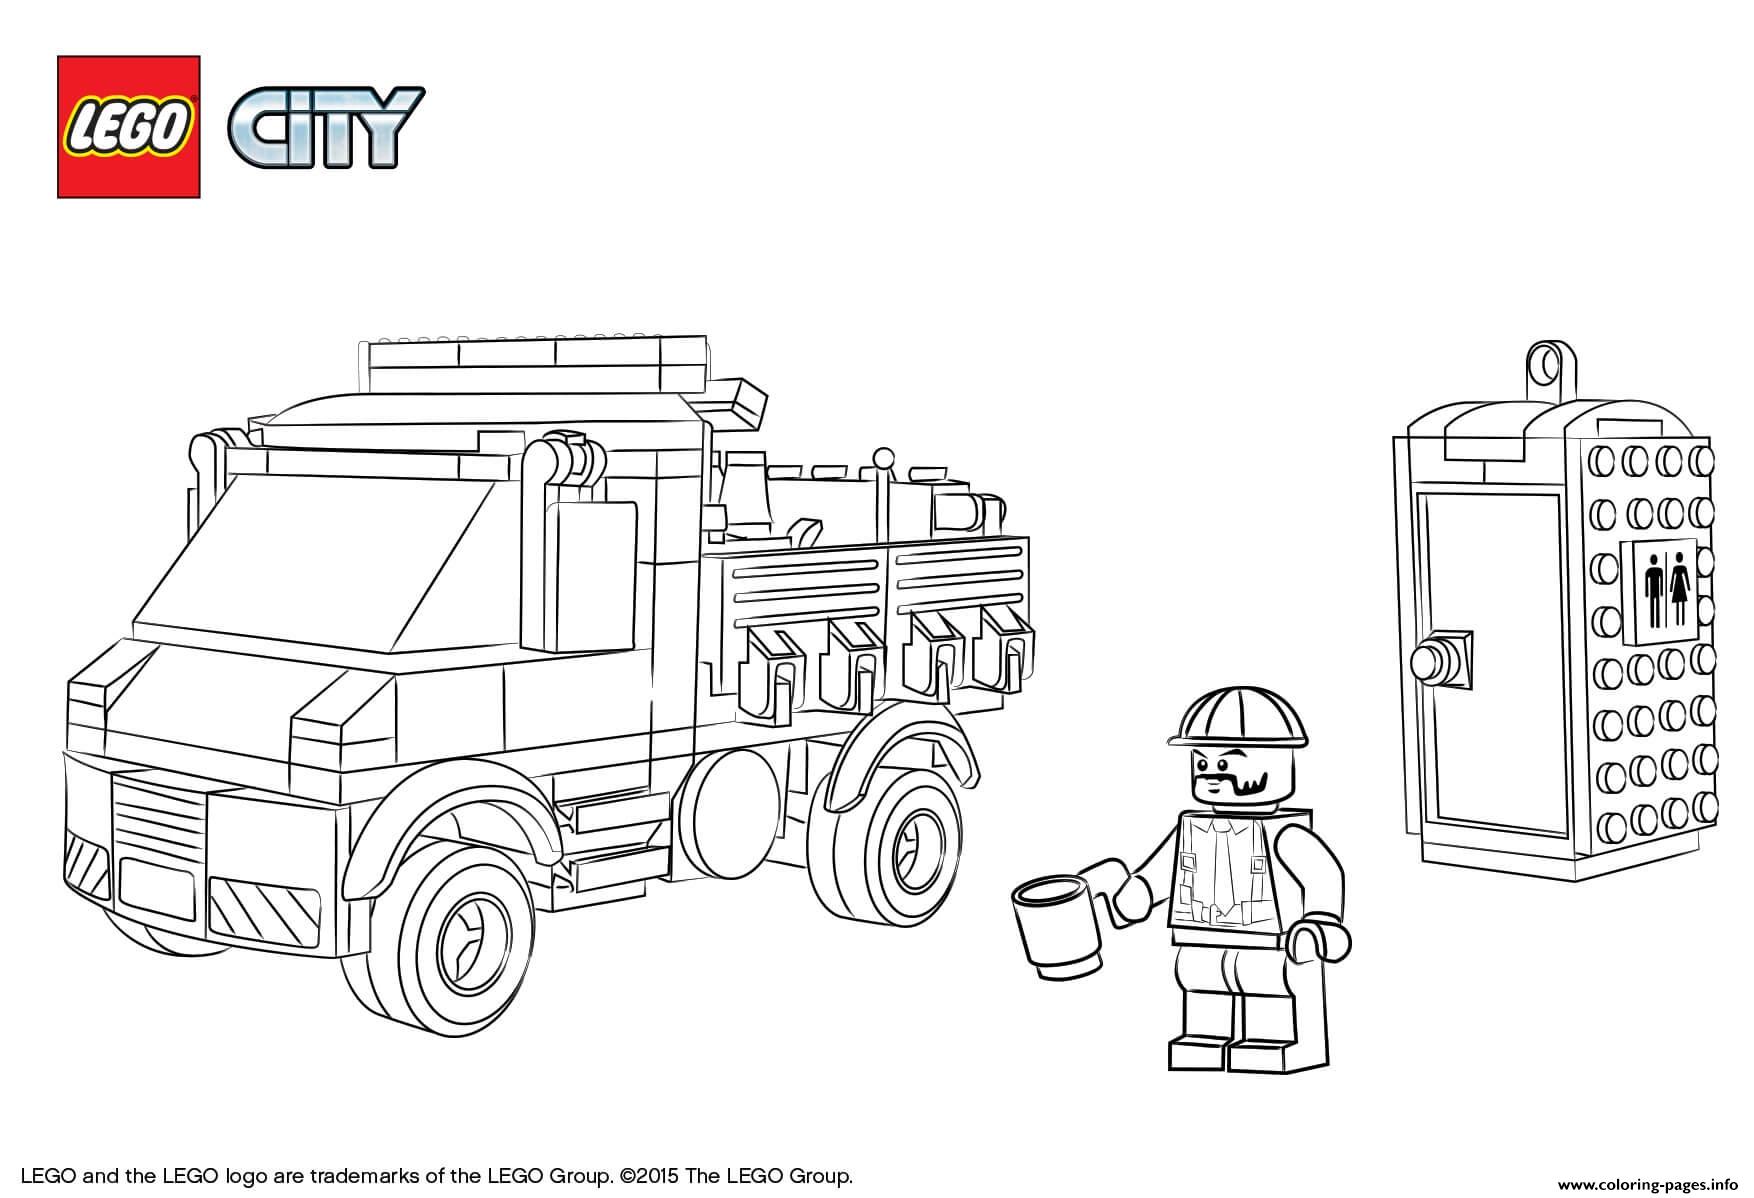 Lego City Service Truck coloring